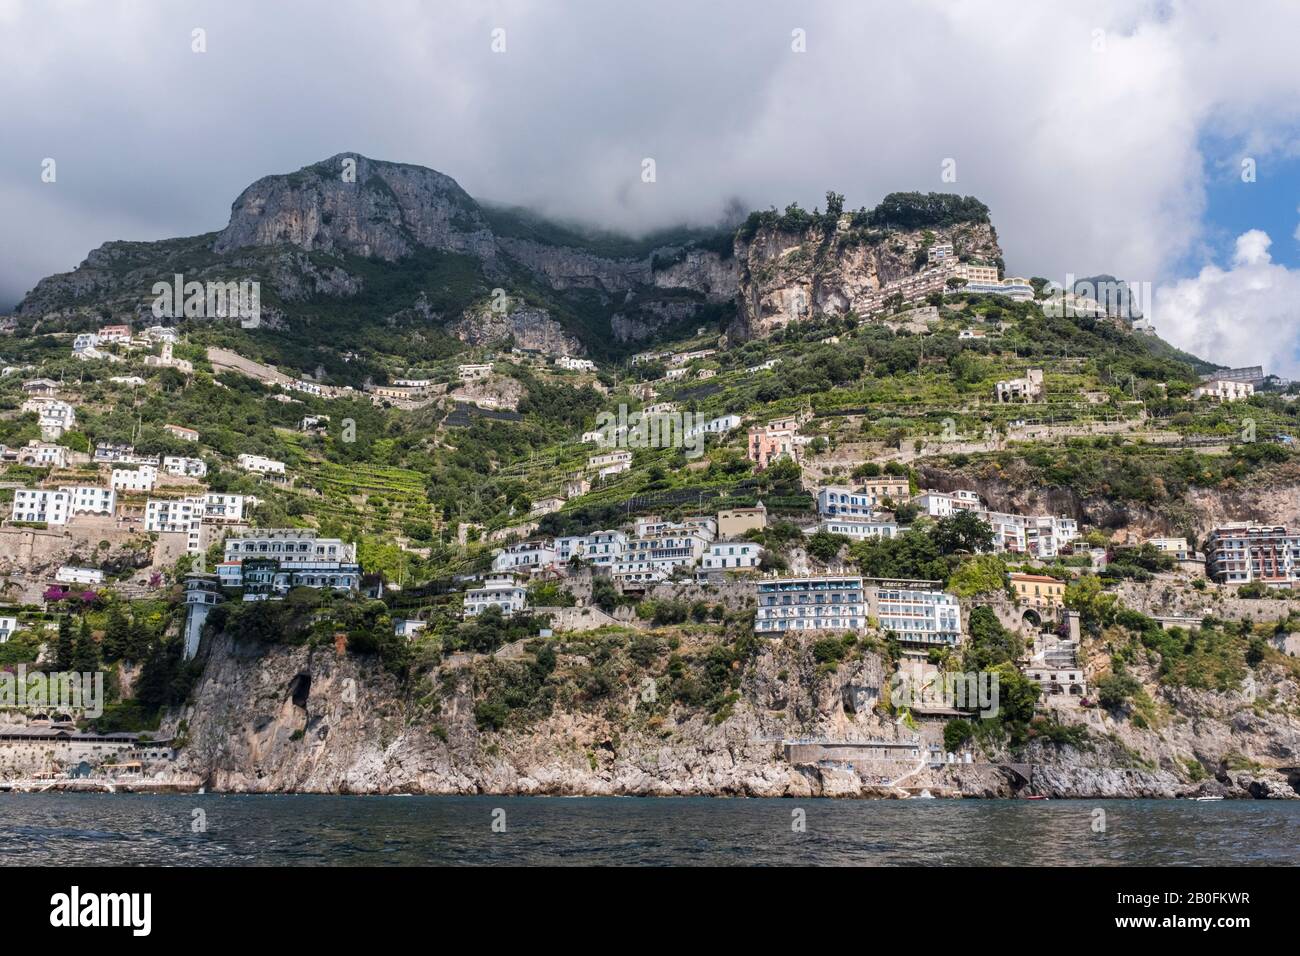 View of the Amalfi Coast, mountains and clouds seen from the sea along the Italian coastline. Stock Photo